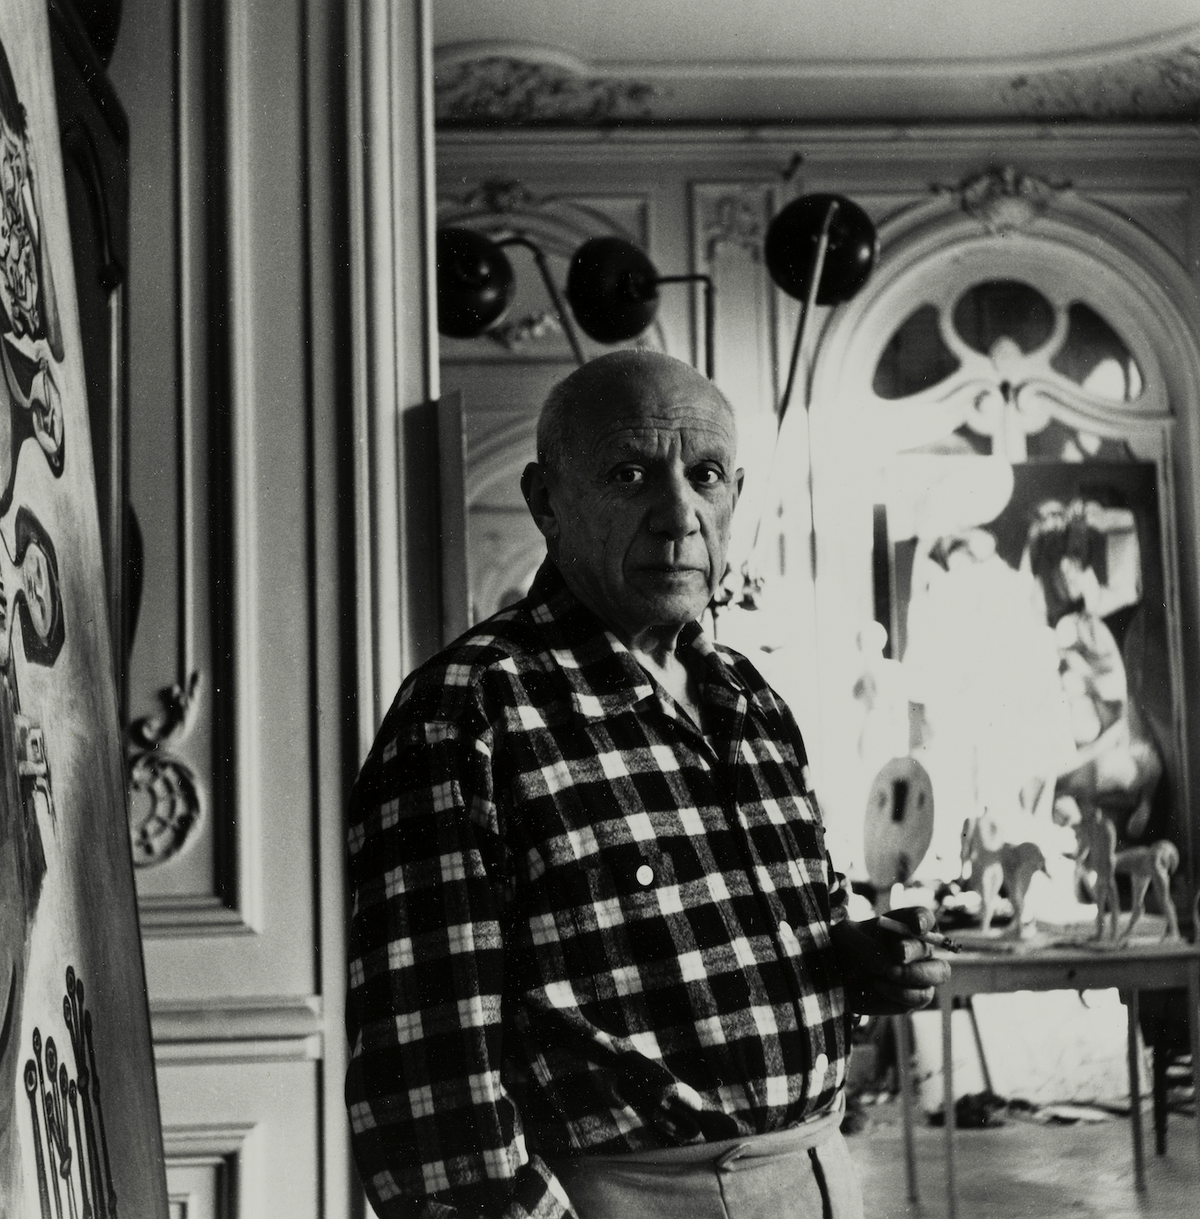 Museums across Europe and US will celebrate the life of Pablo Picasso next year. 

Portrait by Lucien Clergue